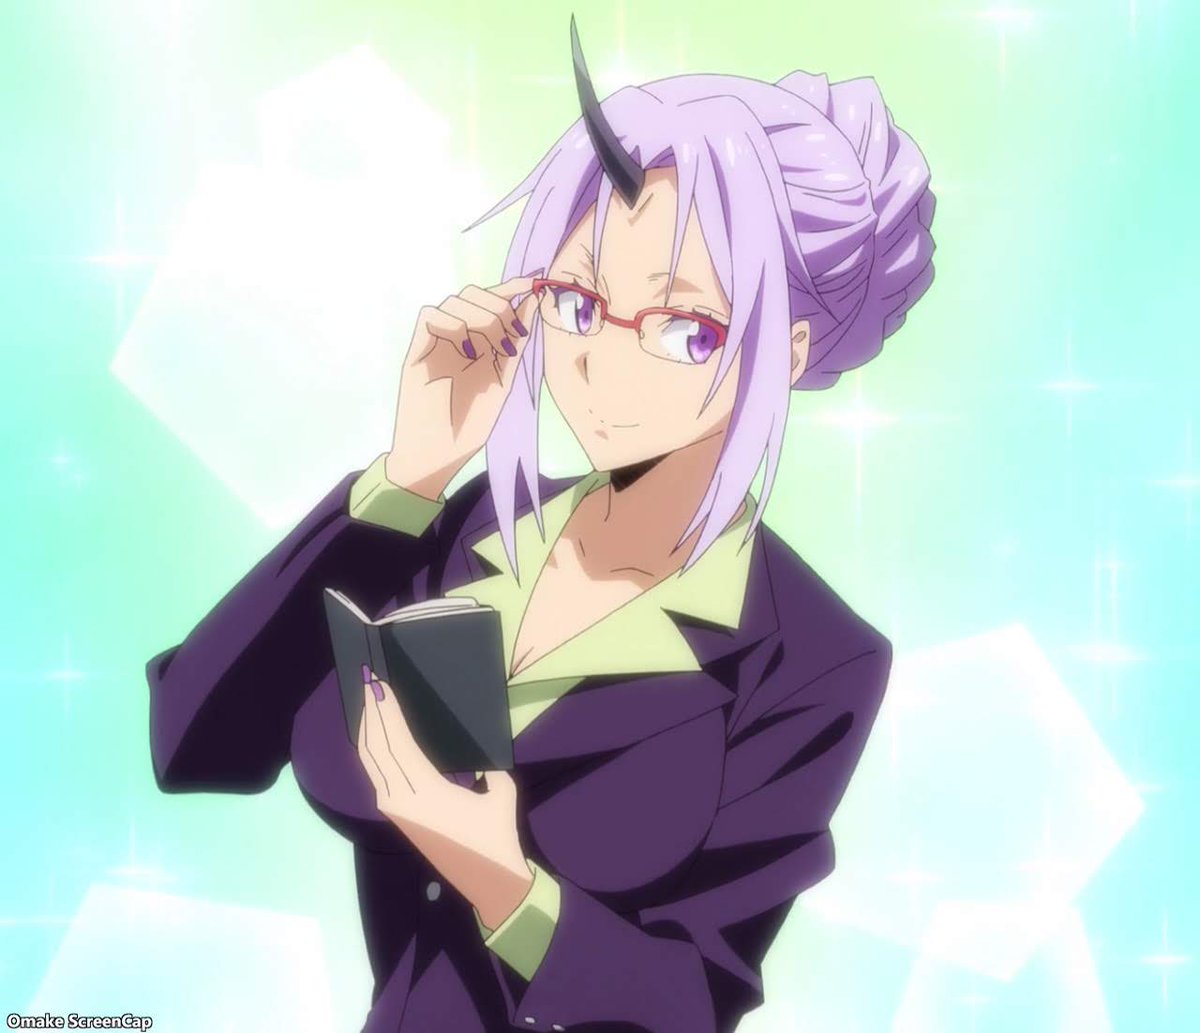 Shion- Poor girl can't cook to save anyone's life, but she means well. Seeing her in action was cool, and she's also cute. Really like her secretary look